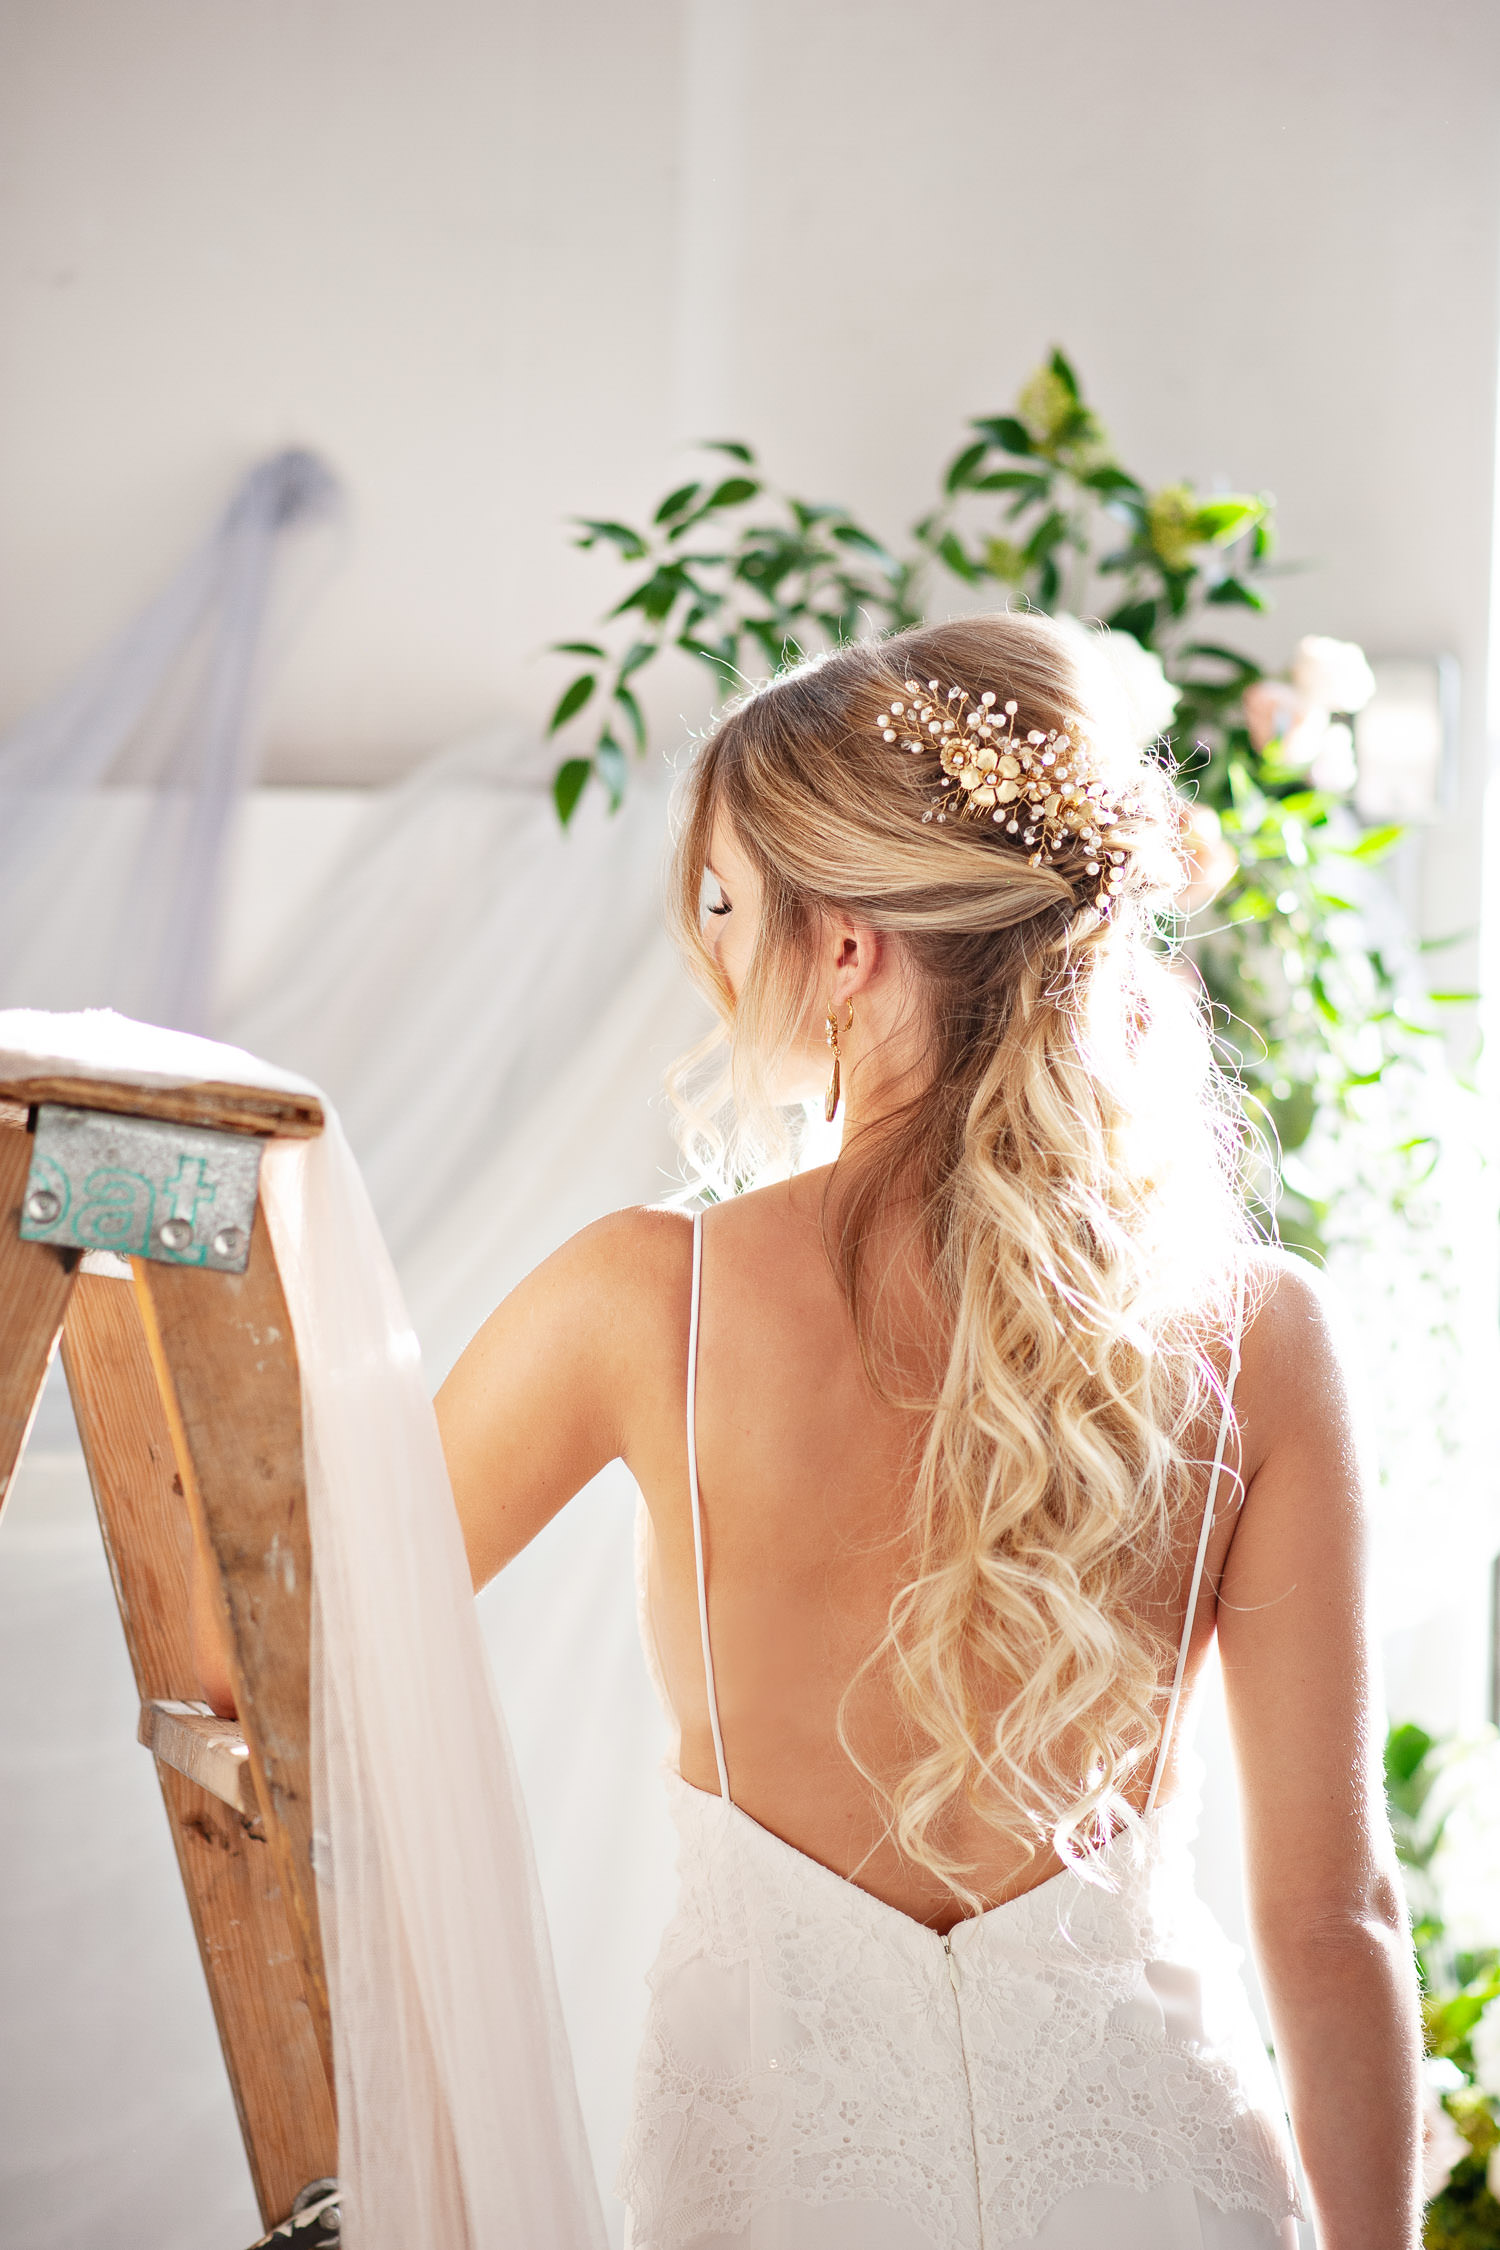 Gold hair comb from Joanna Bisley Design captured by Tara Whittaker Photography